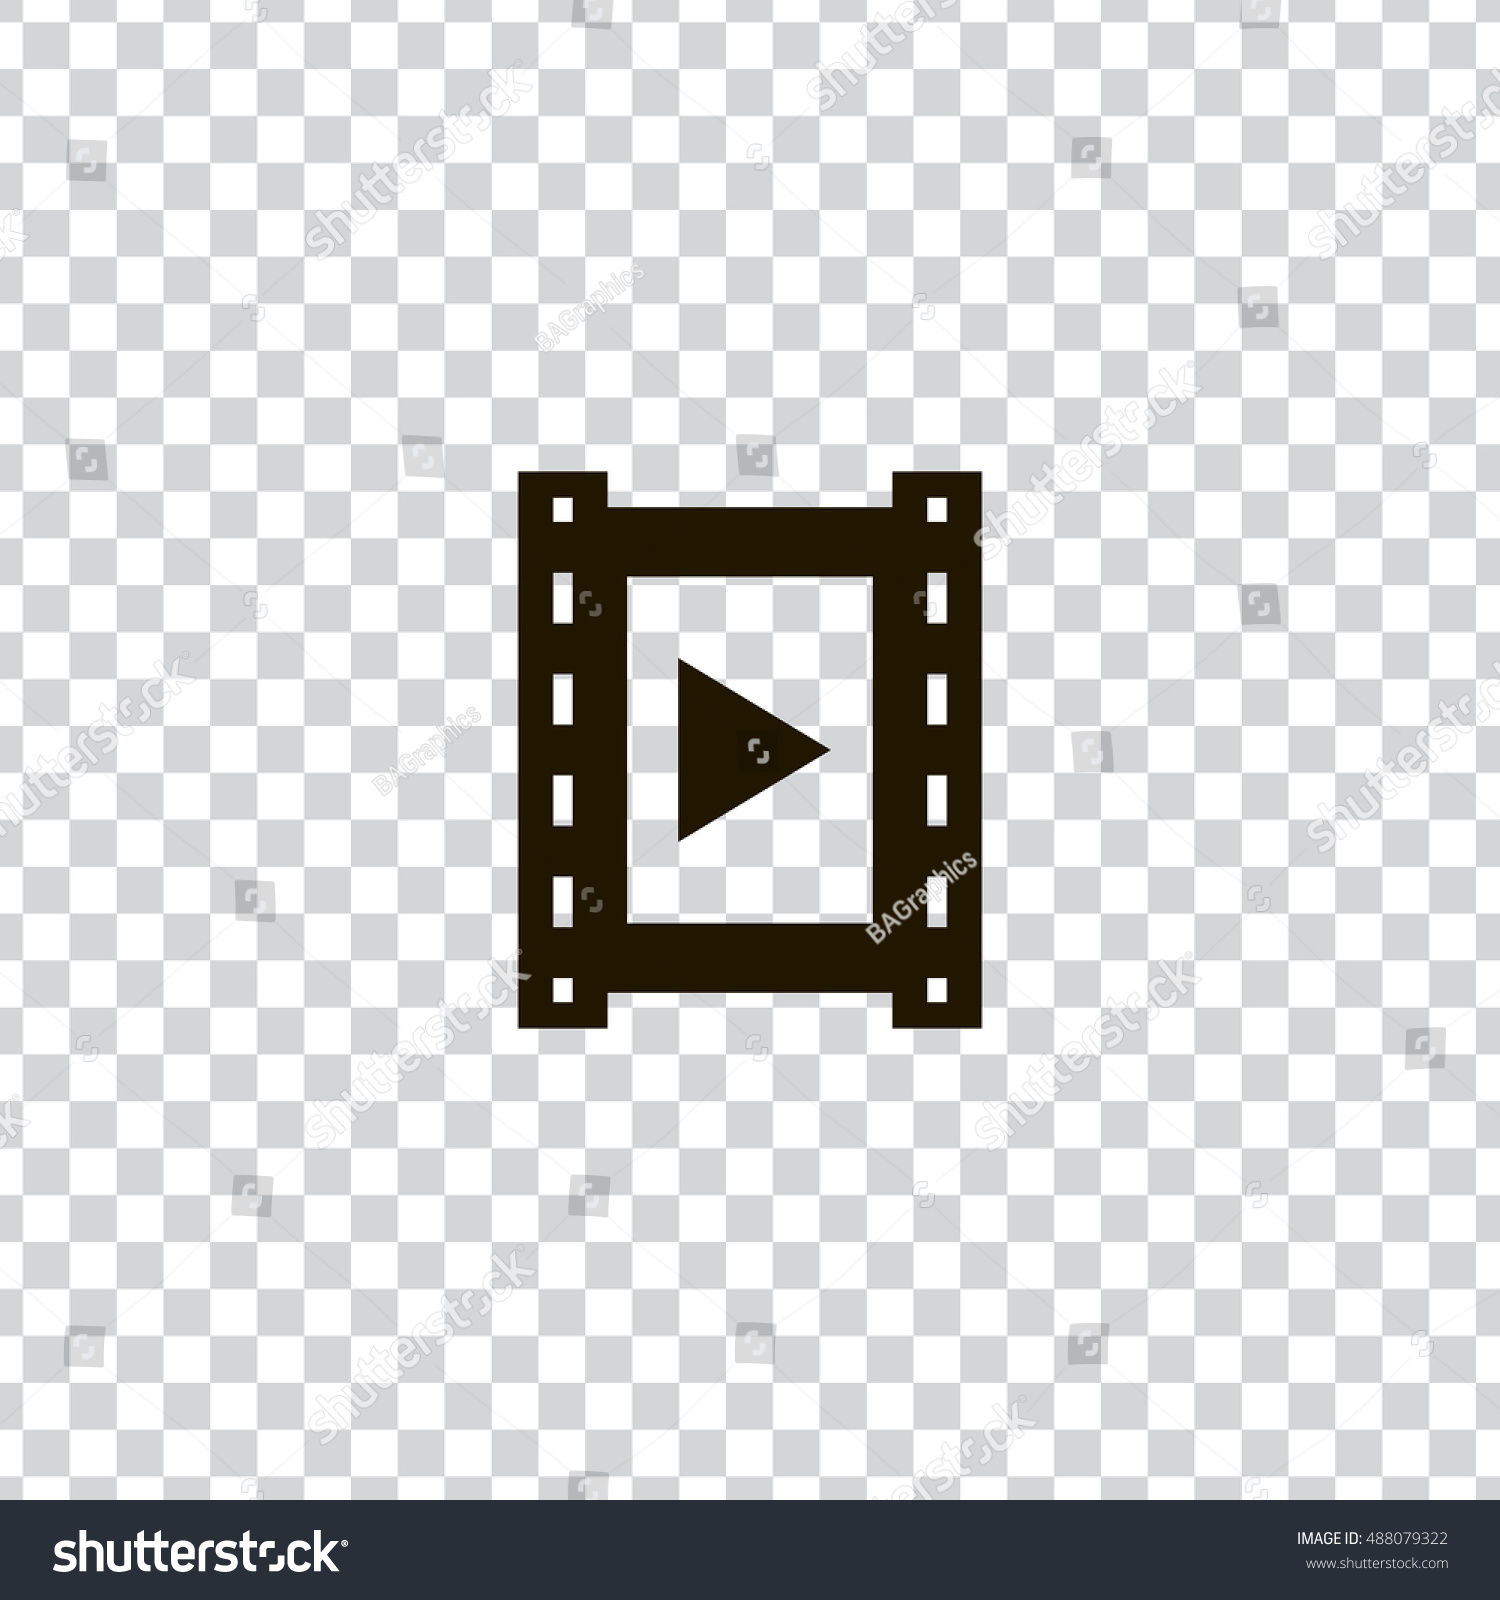 SVG of Video icon vector, clip art. Also useful as logo, web element, symbol, graphic image, transparent silhouette and illustration. Compatible with ai, cdr, jpg, png, svg, pdf, ico  and eps formats. svg